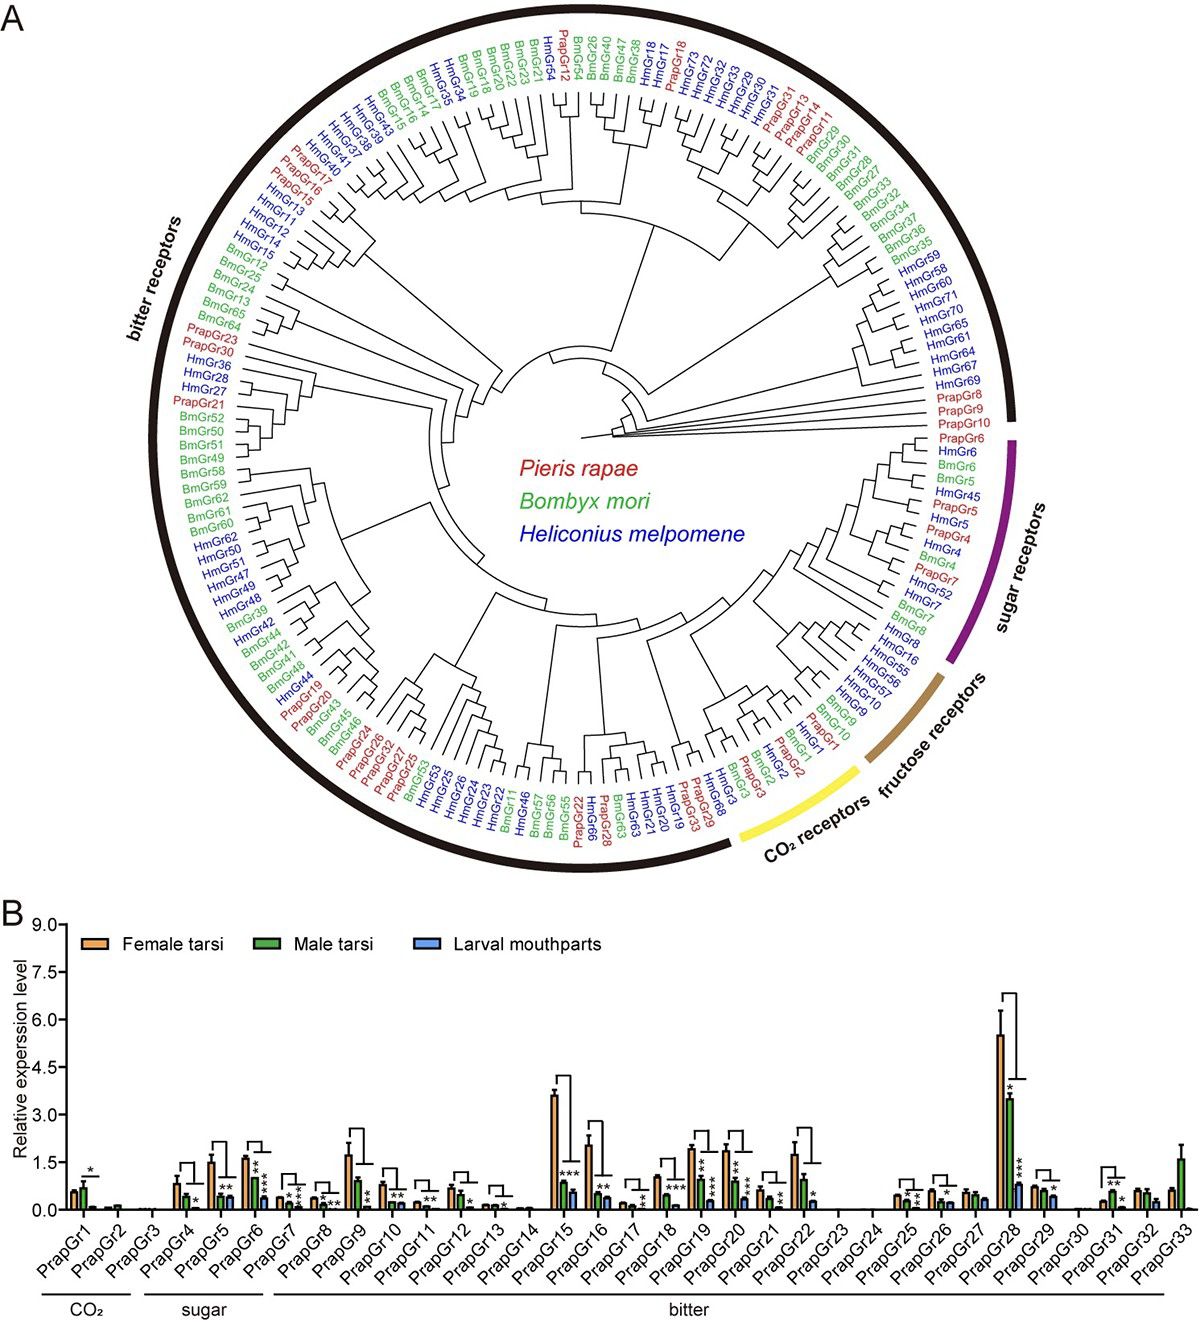 Fig 5. Phylogenetic relationships and tissue expression patterns of GR genes in P. rapae.